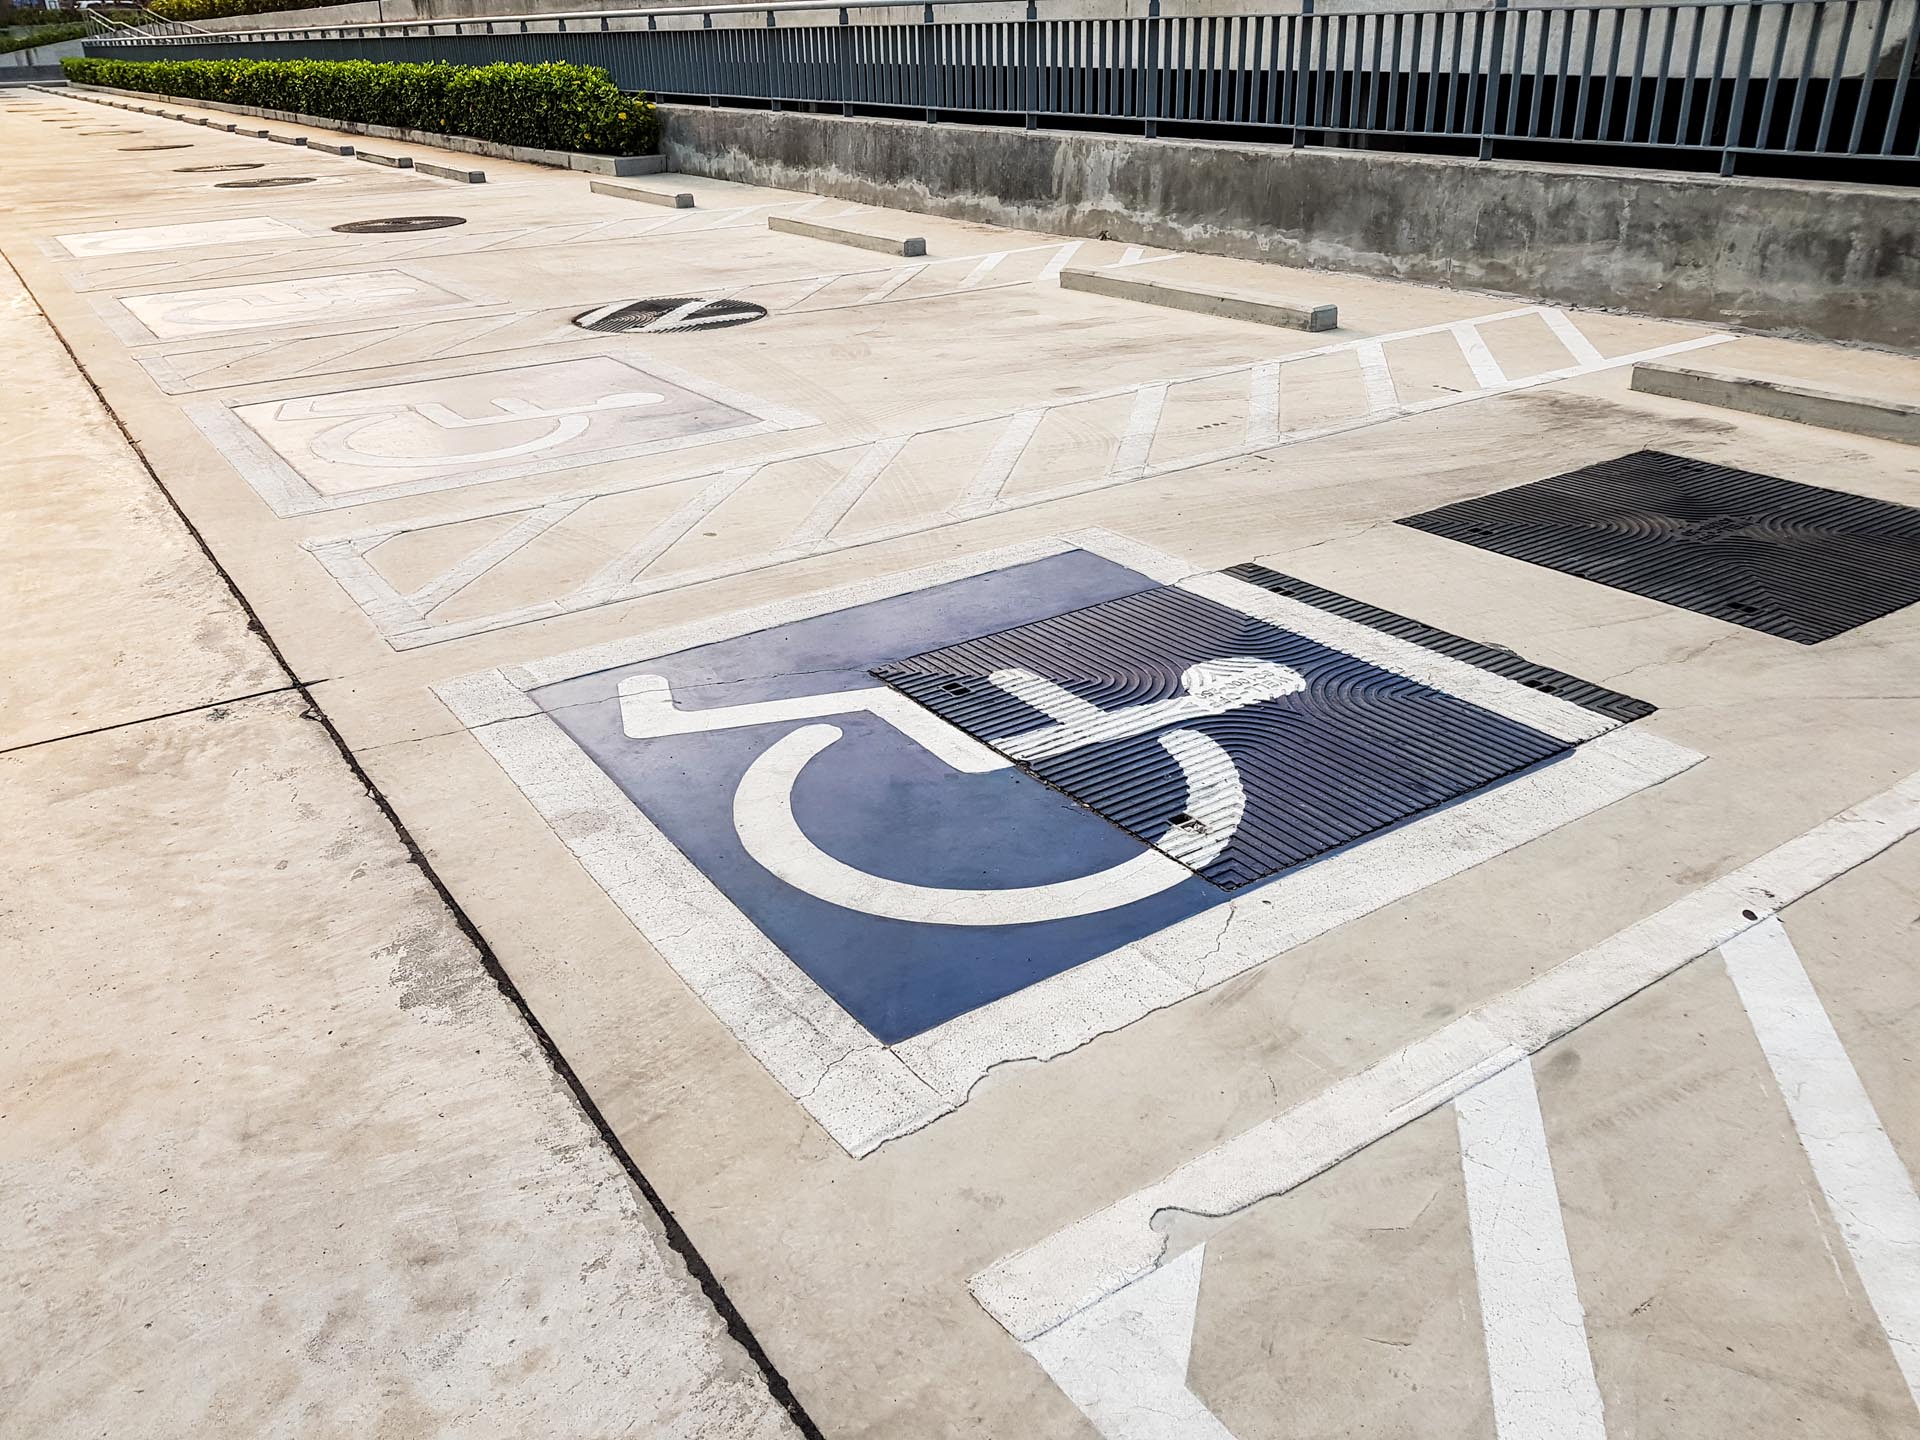 International handicapped (wheelchair) or Disabled parking symbol